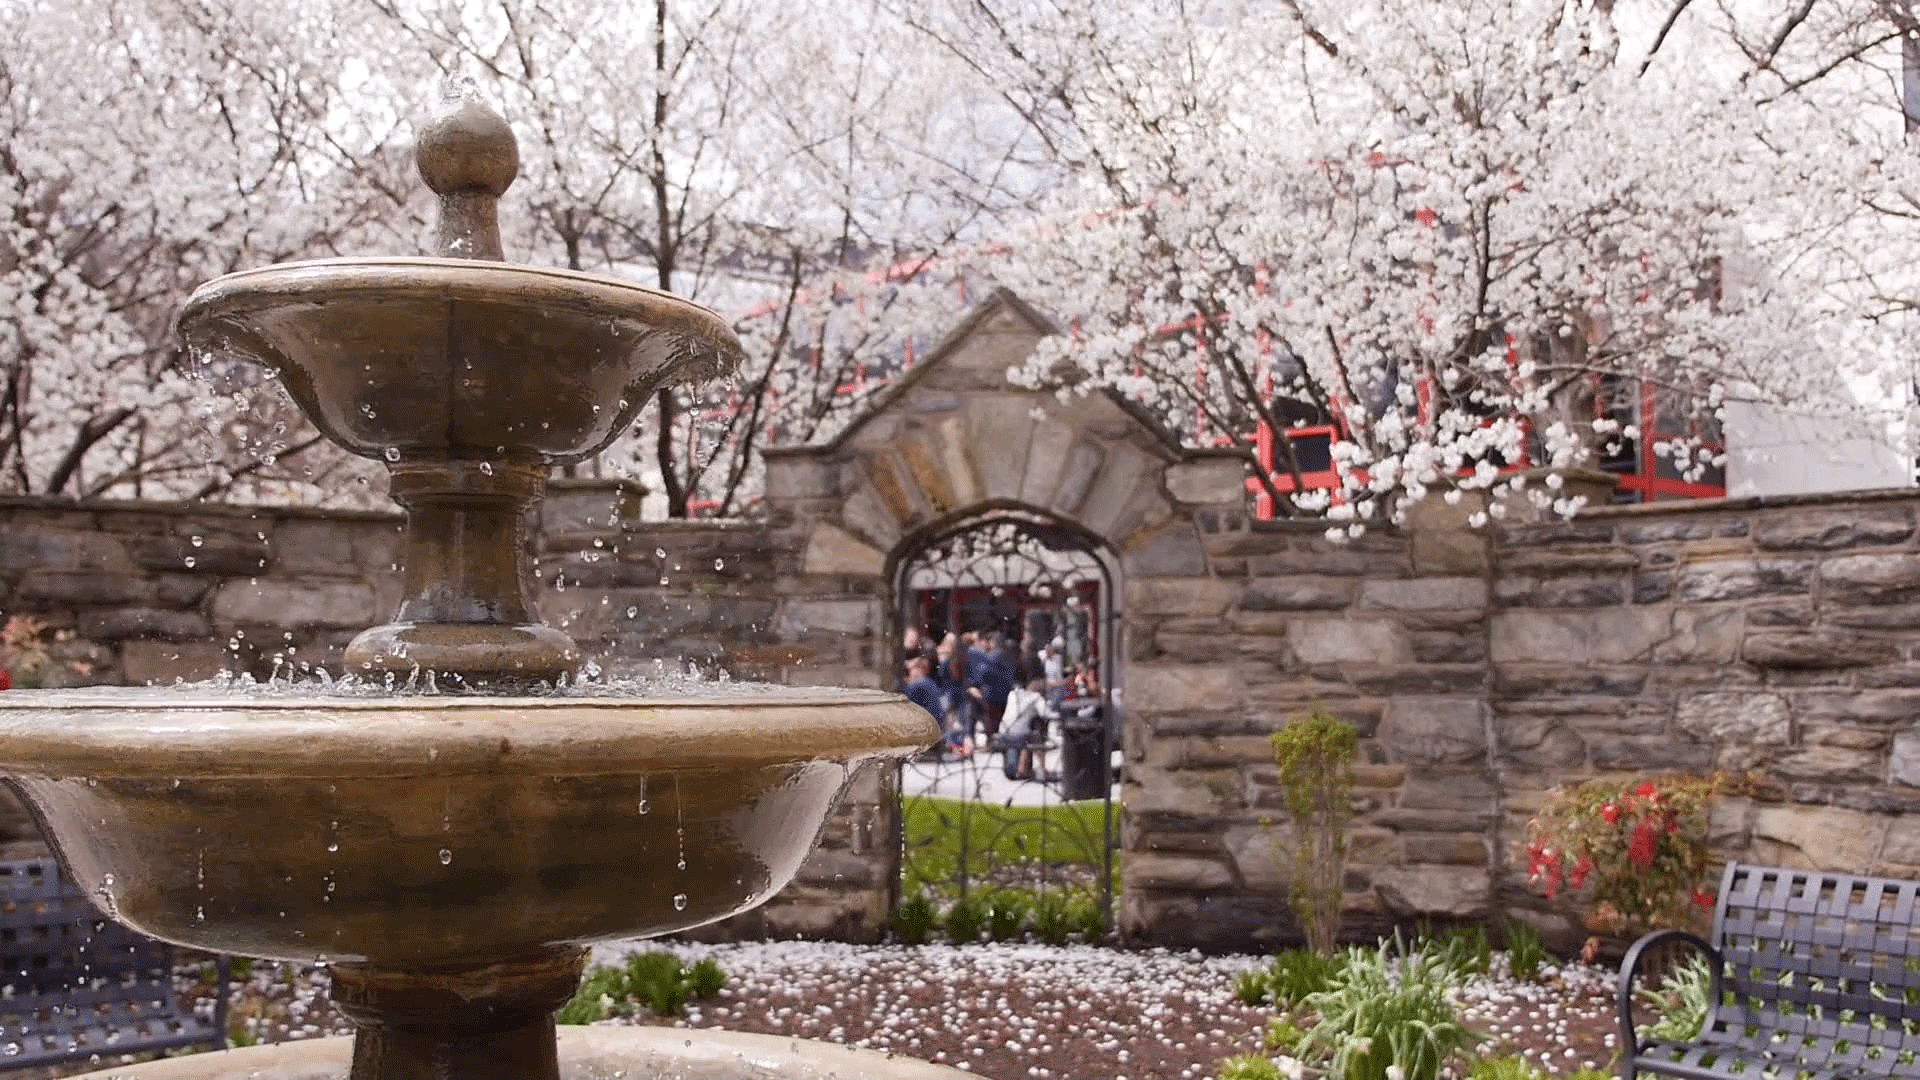 Animated gif of water flowing in a birth bath fountain in a PCOM courtyard with blooming trees